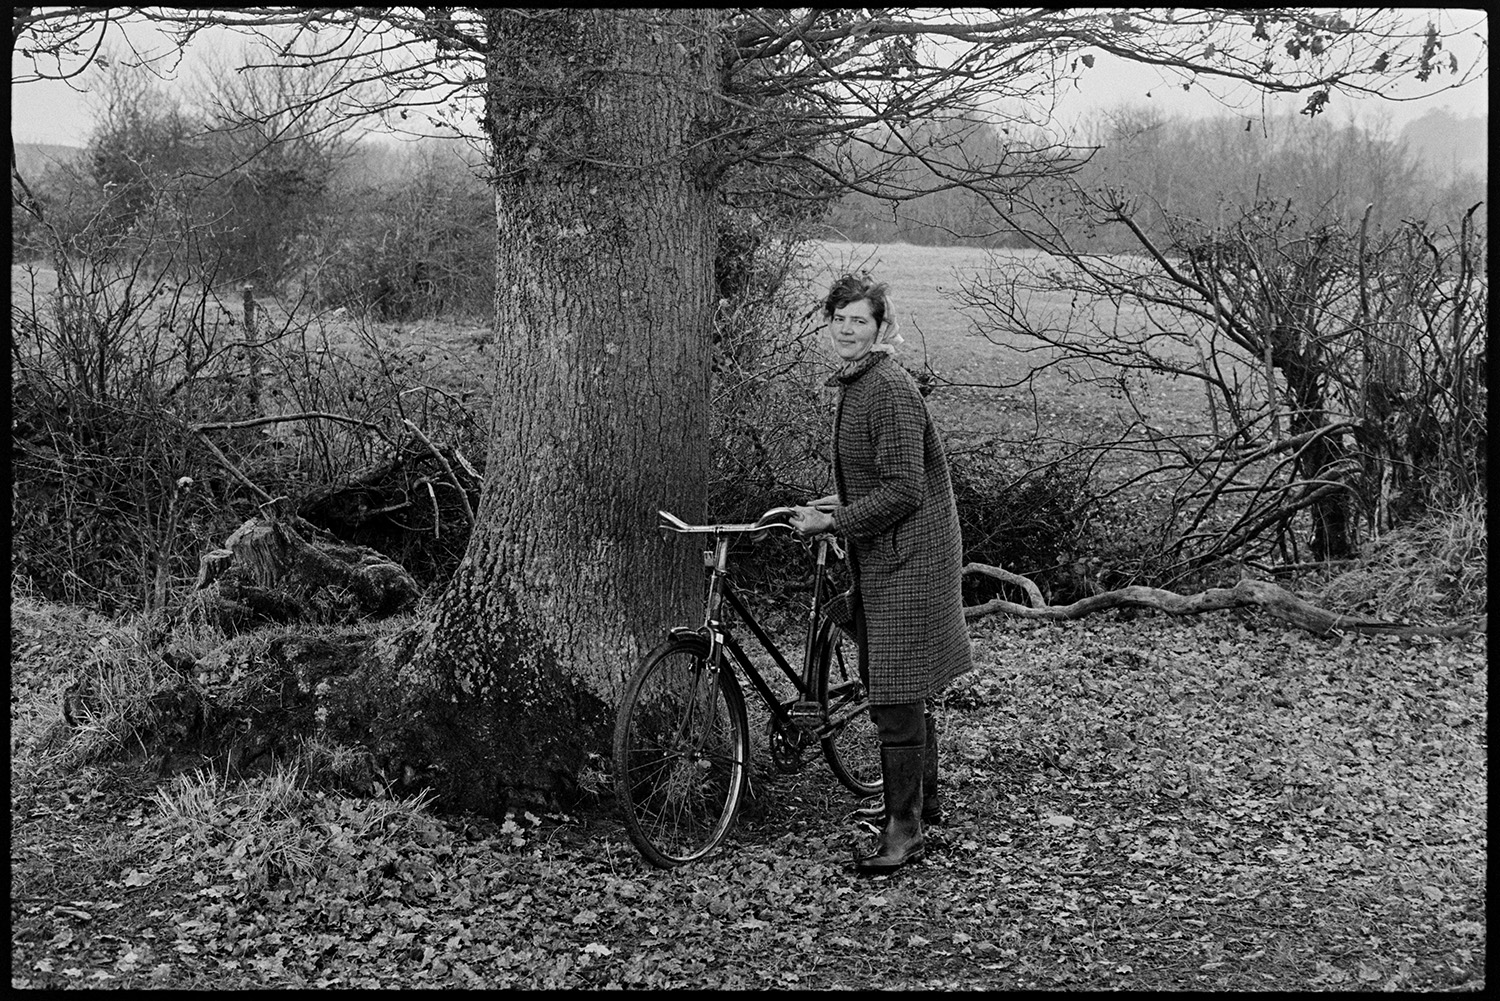 Woman checking sheep, bicycle in field. 
[A woman posing with her bicycle by a tree in Monkokehampton. A hedge and field can be seen in the background.]